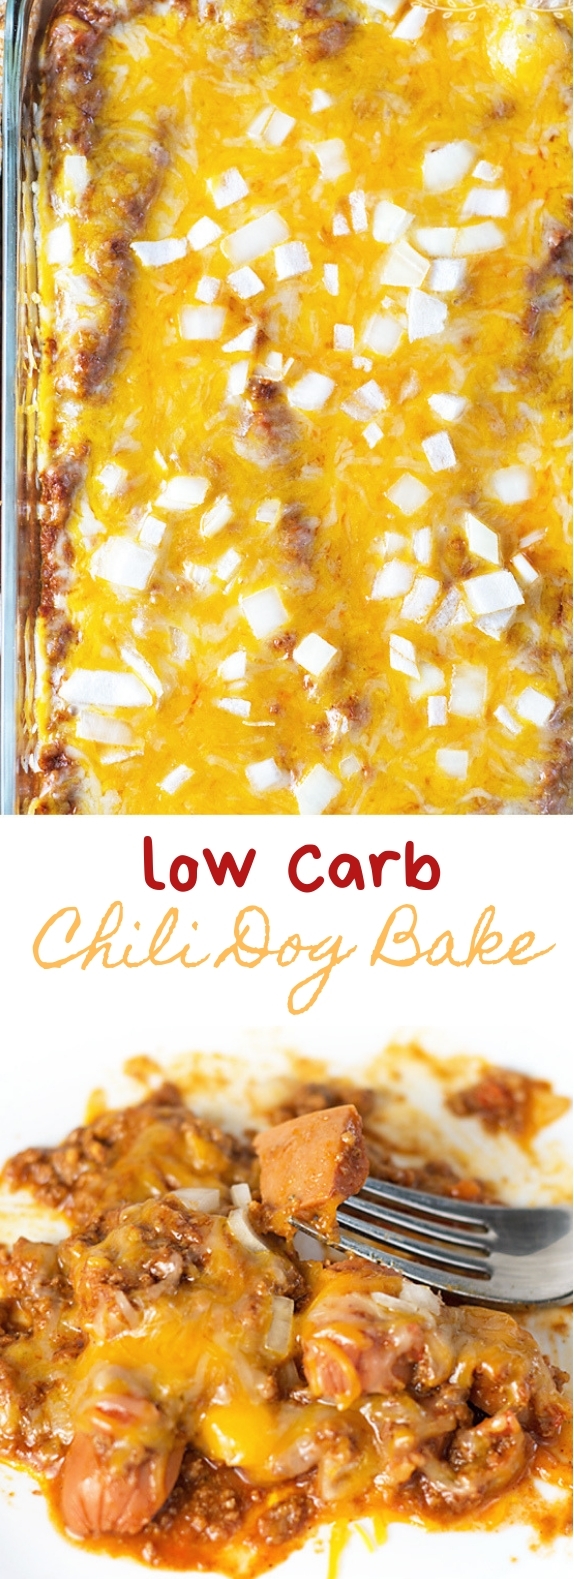 Low Carb Chili Dog Bake #healthy #lowcarb